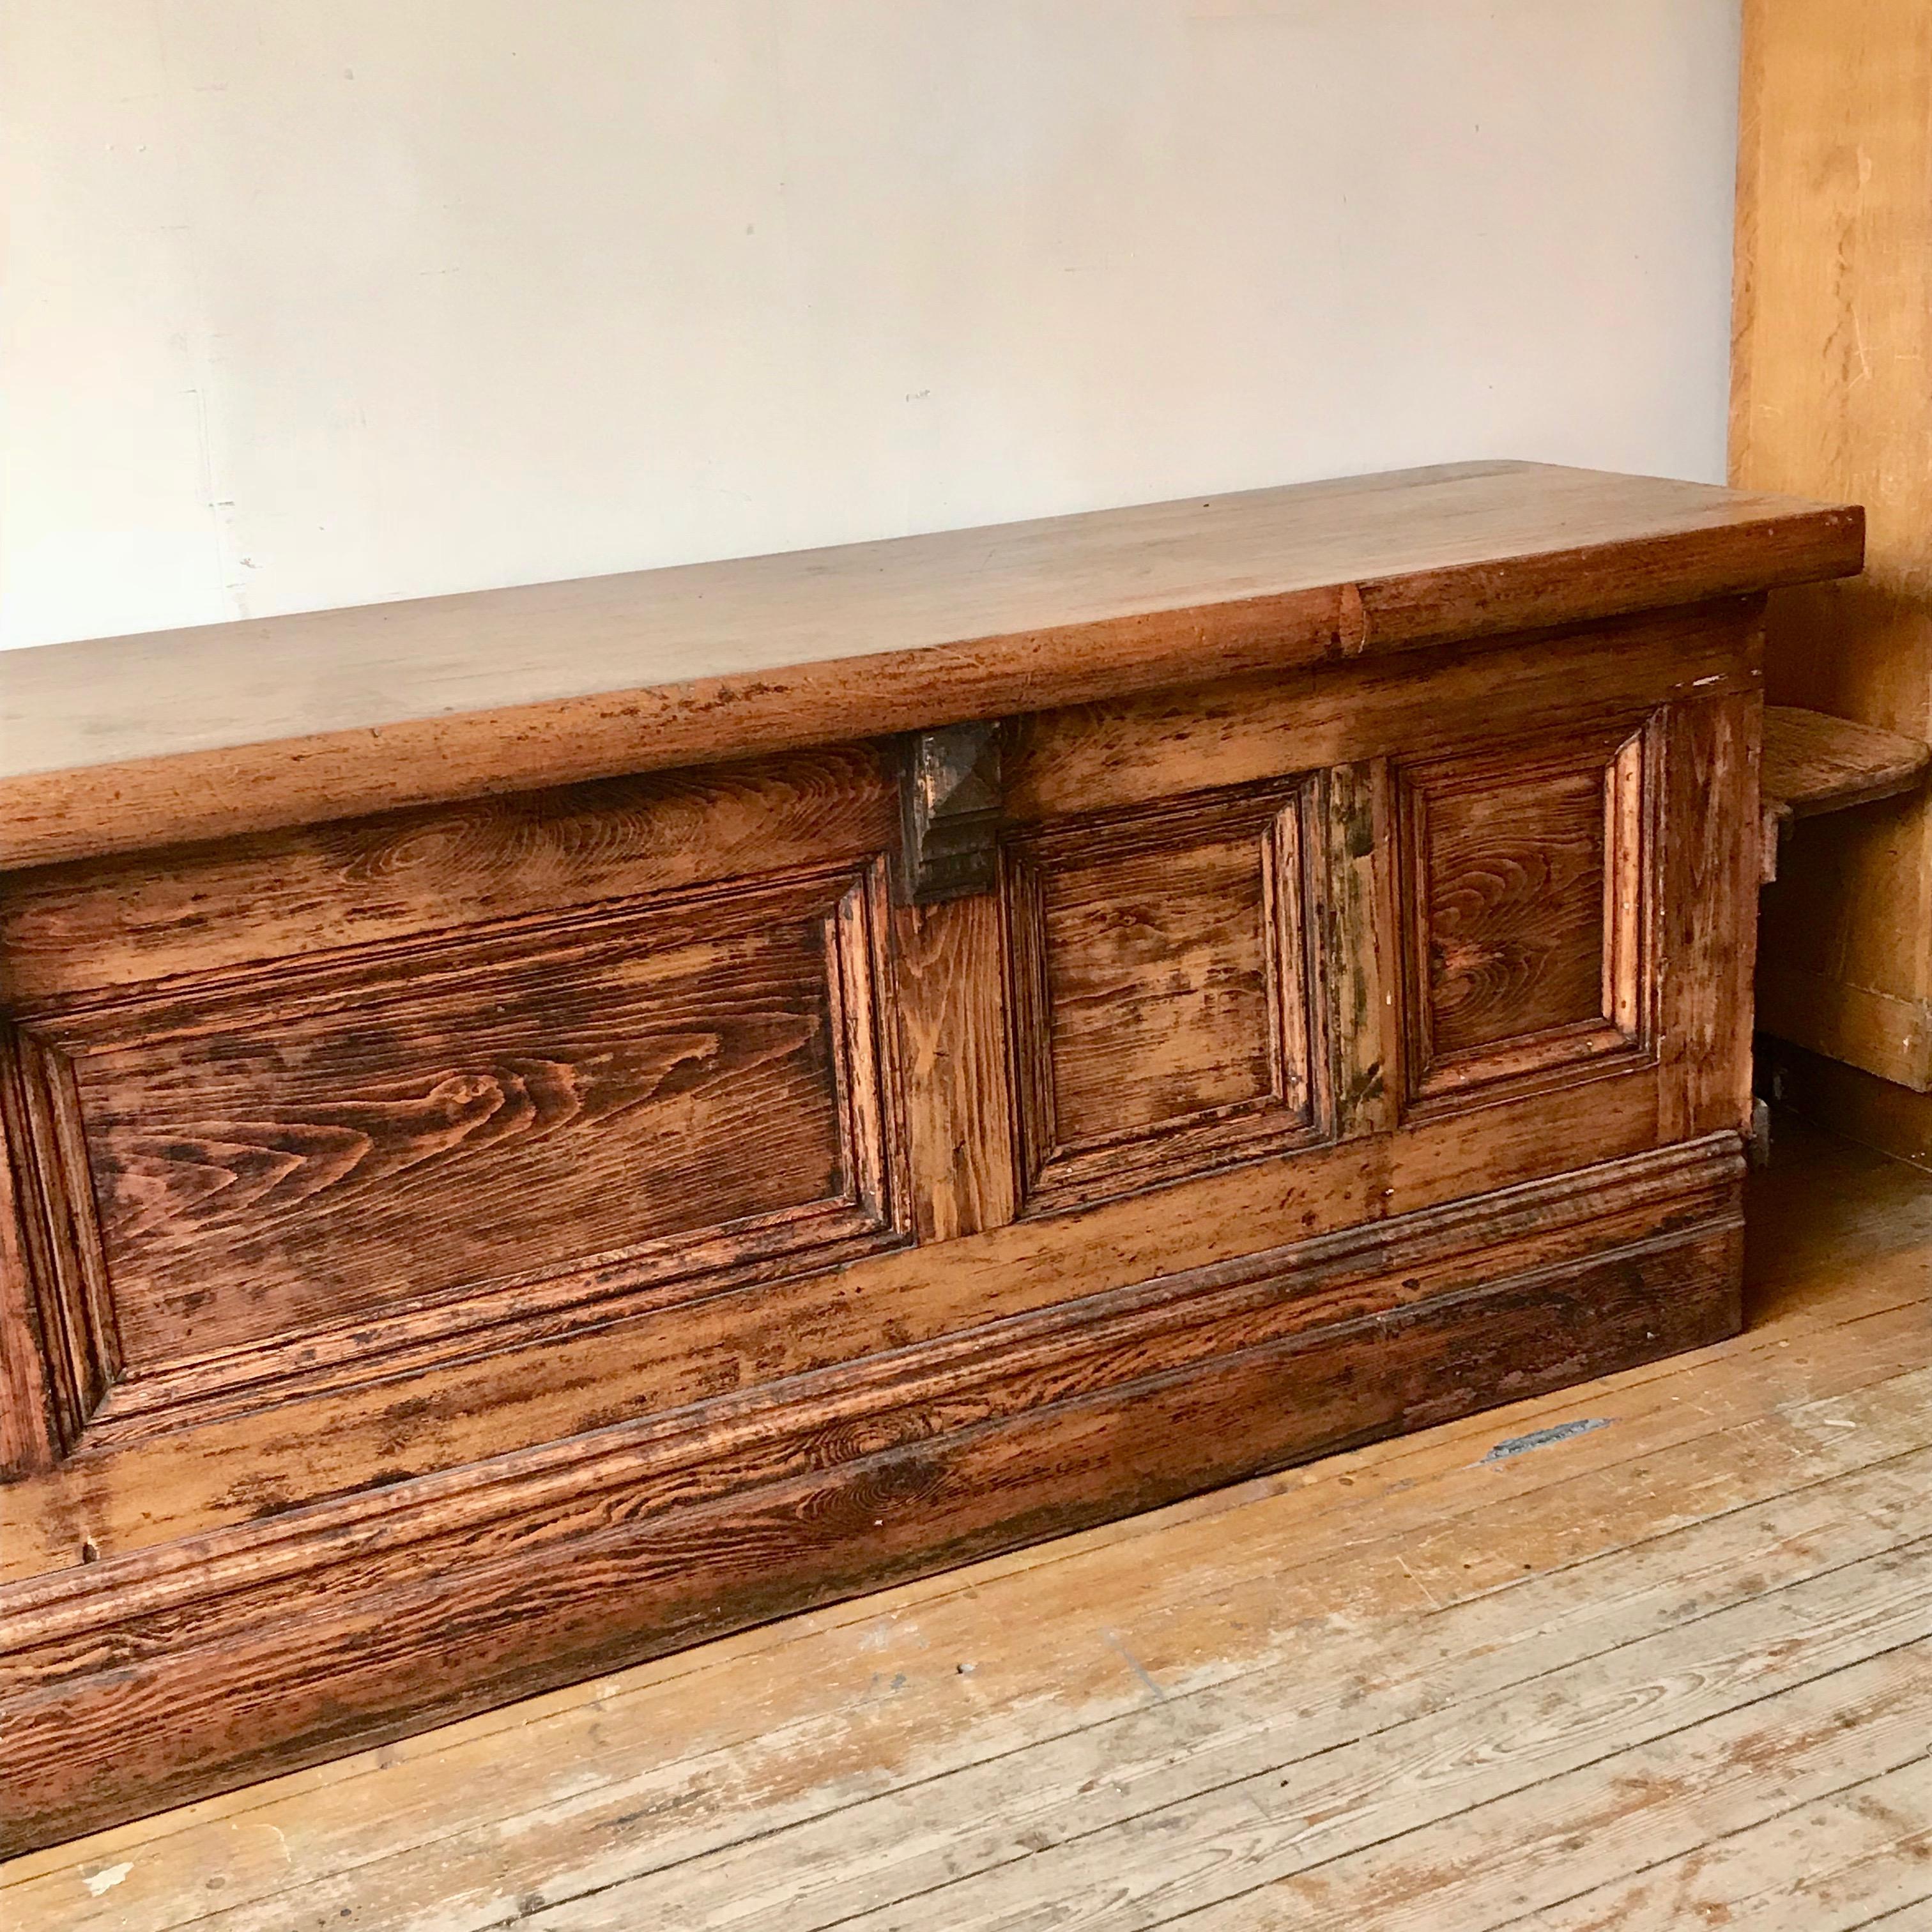 Large solid pine Victorian shop counter made in 1897 and salvaged from it's original shop in Stockport, UK. The right hand side features a fold out seat. It has been sympathetically restored by removing the worn varnish removed and then a waxed